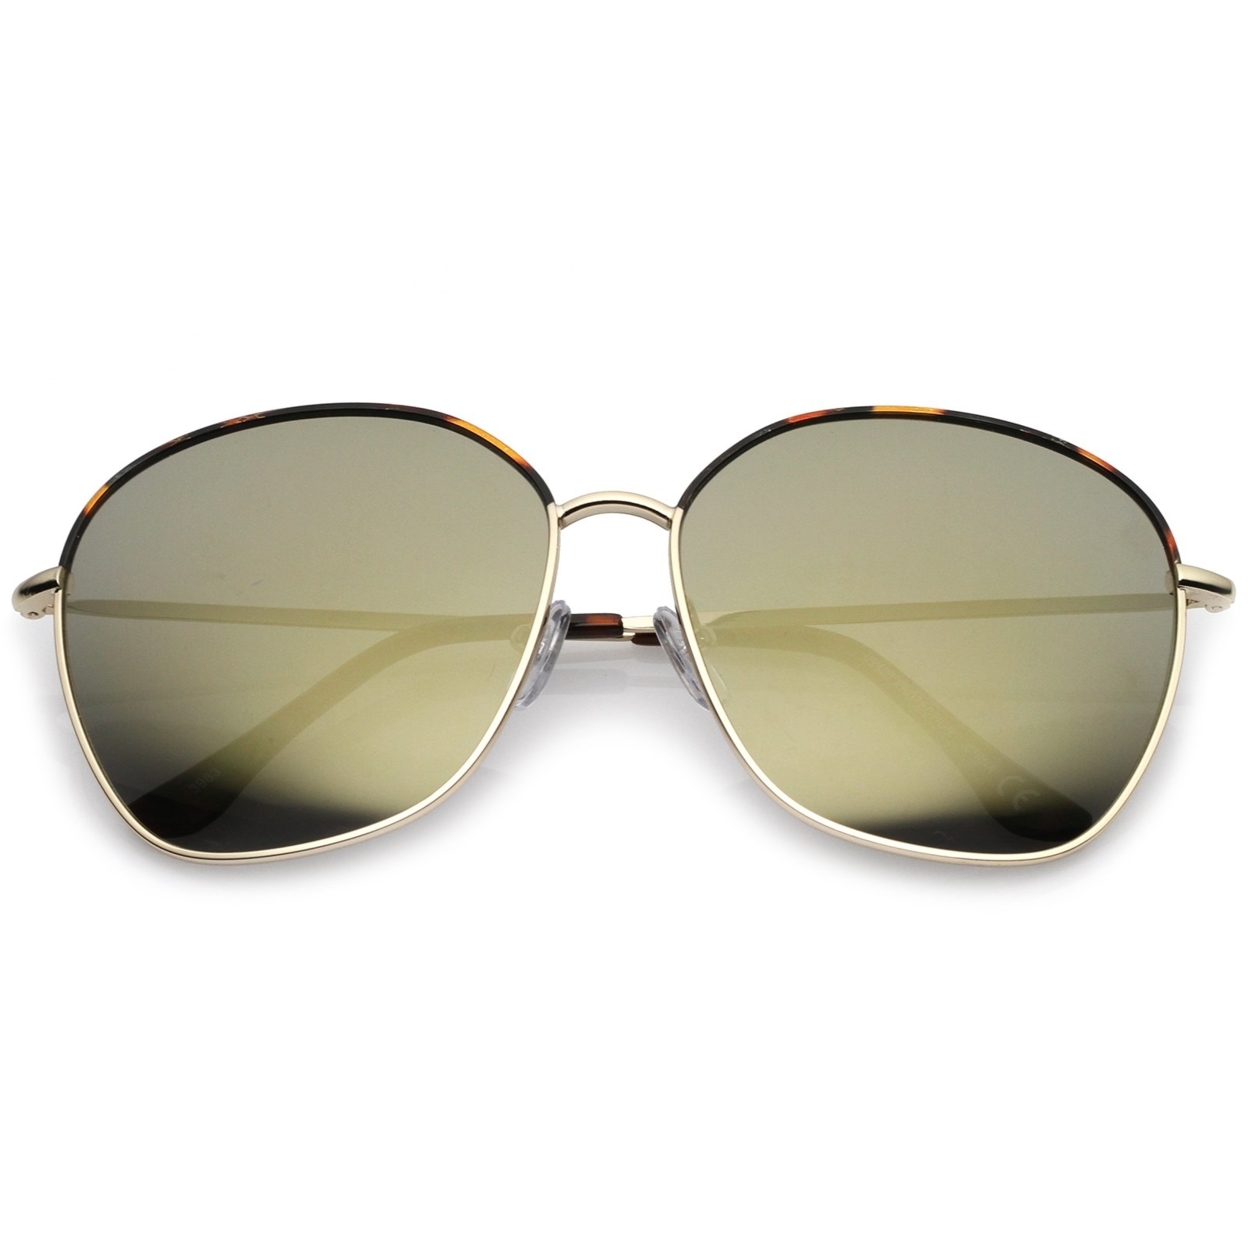 Mod Oversize Two-Toned Metal Frame Slim Temples Square Sunglasses 61mm - Tortoise-Gold / Brown